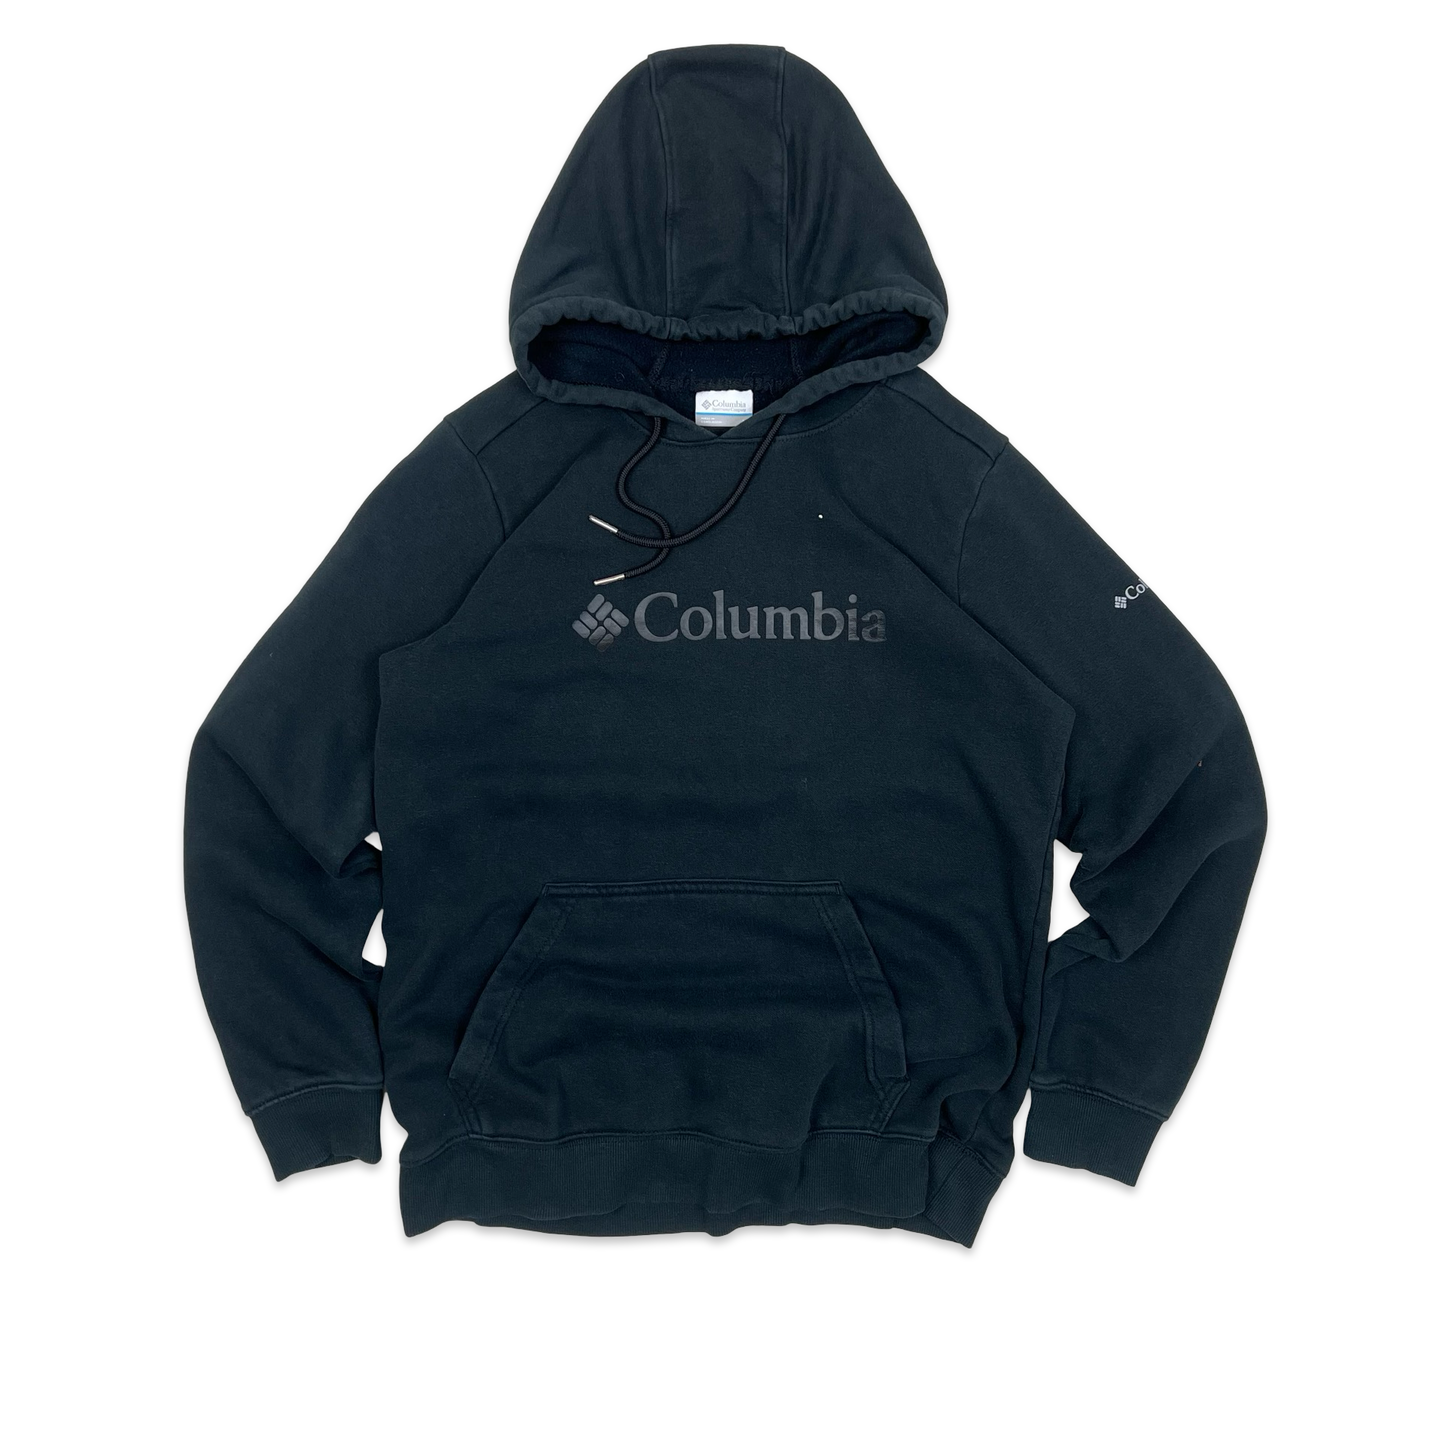 Columbia Black Spell Out Hoodie M